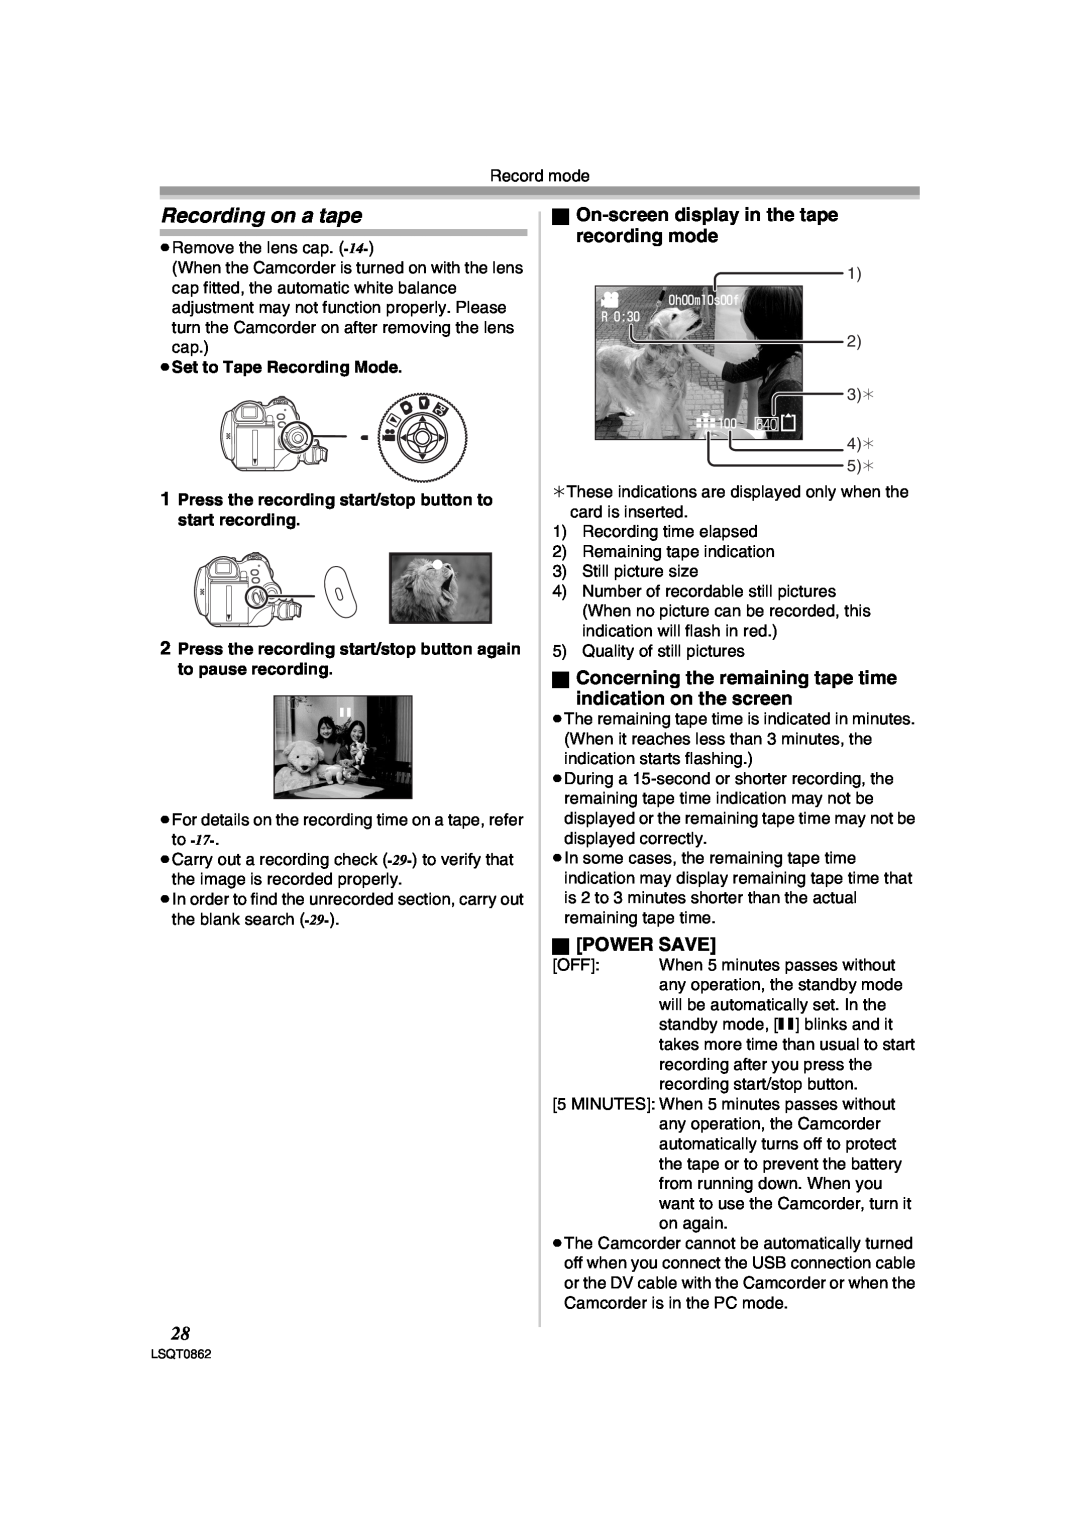 Panasonic PV-GS250 operating instructions Recording on a tape, ª On-screen display in the tape recording mode, ª Power Save 